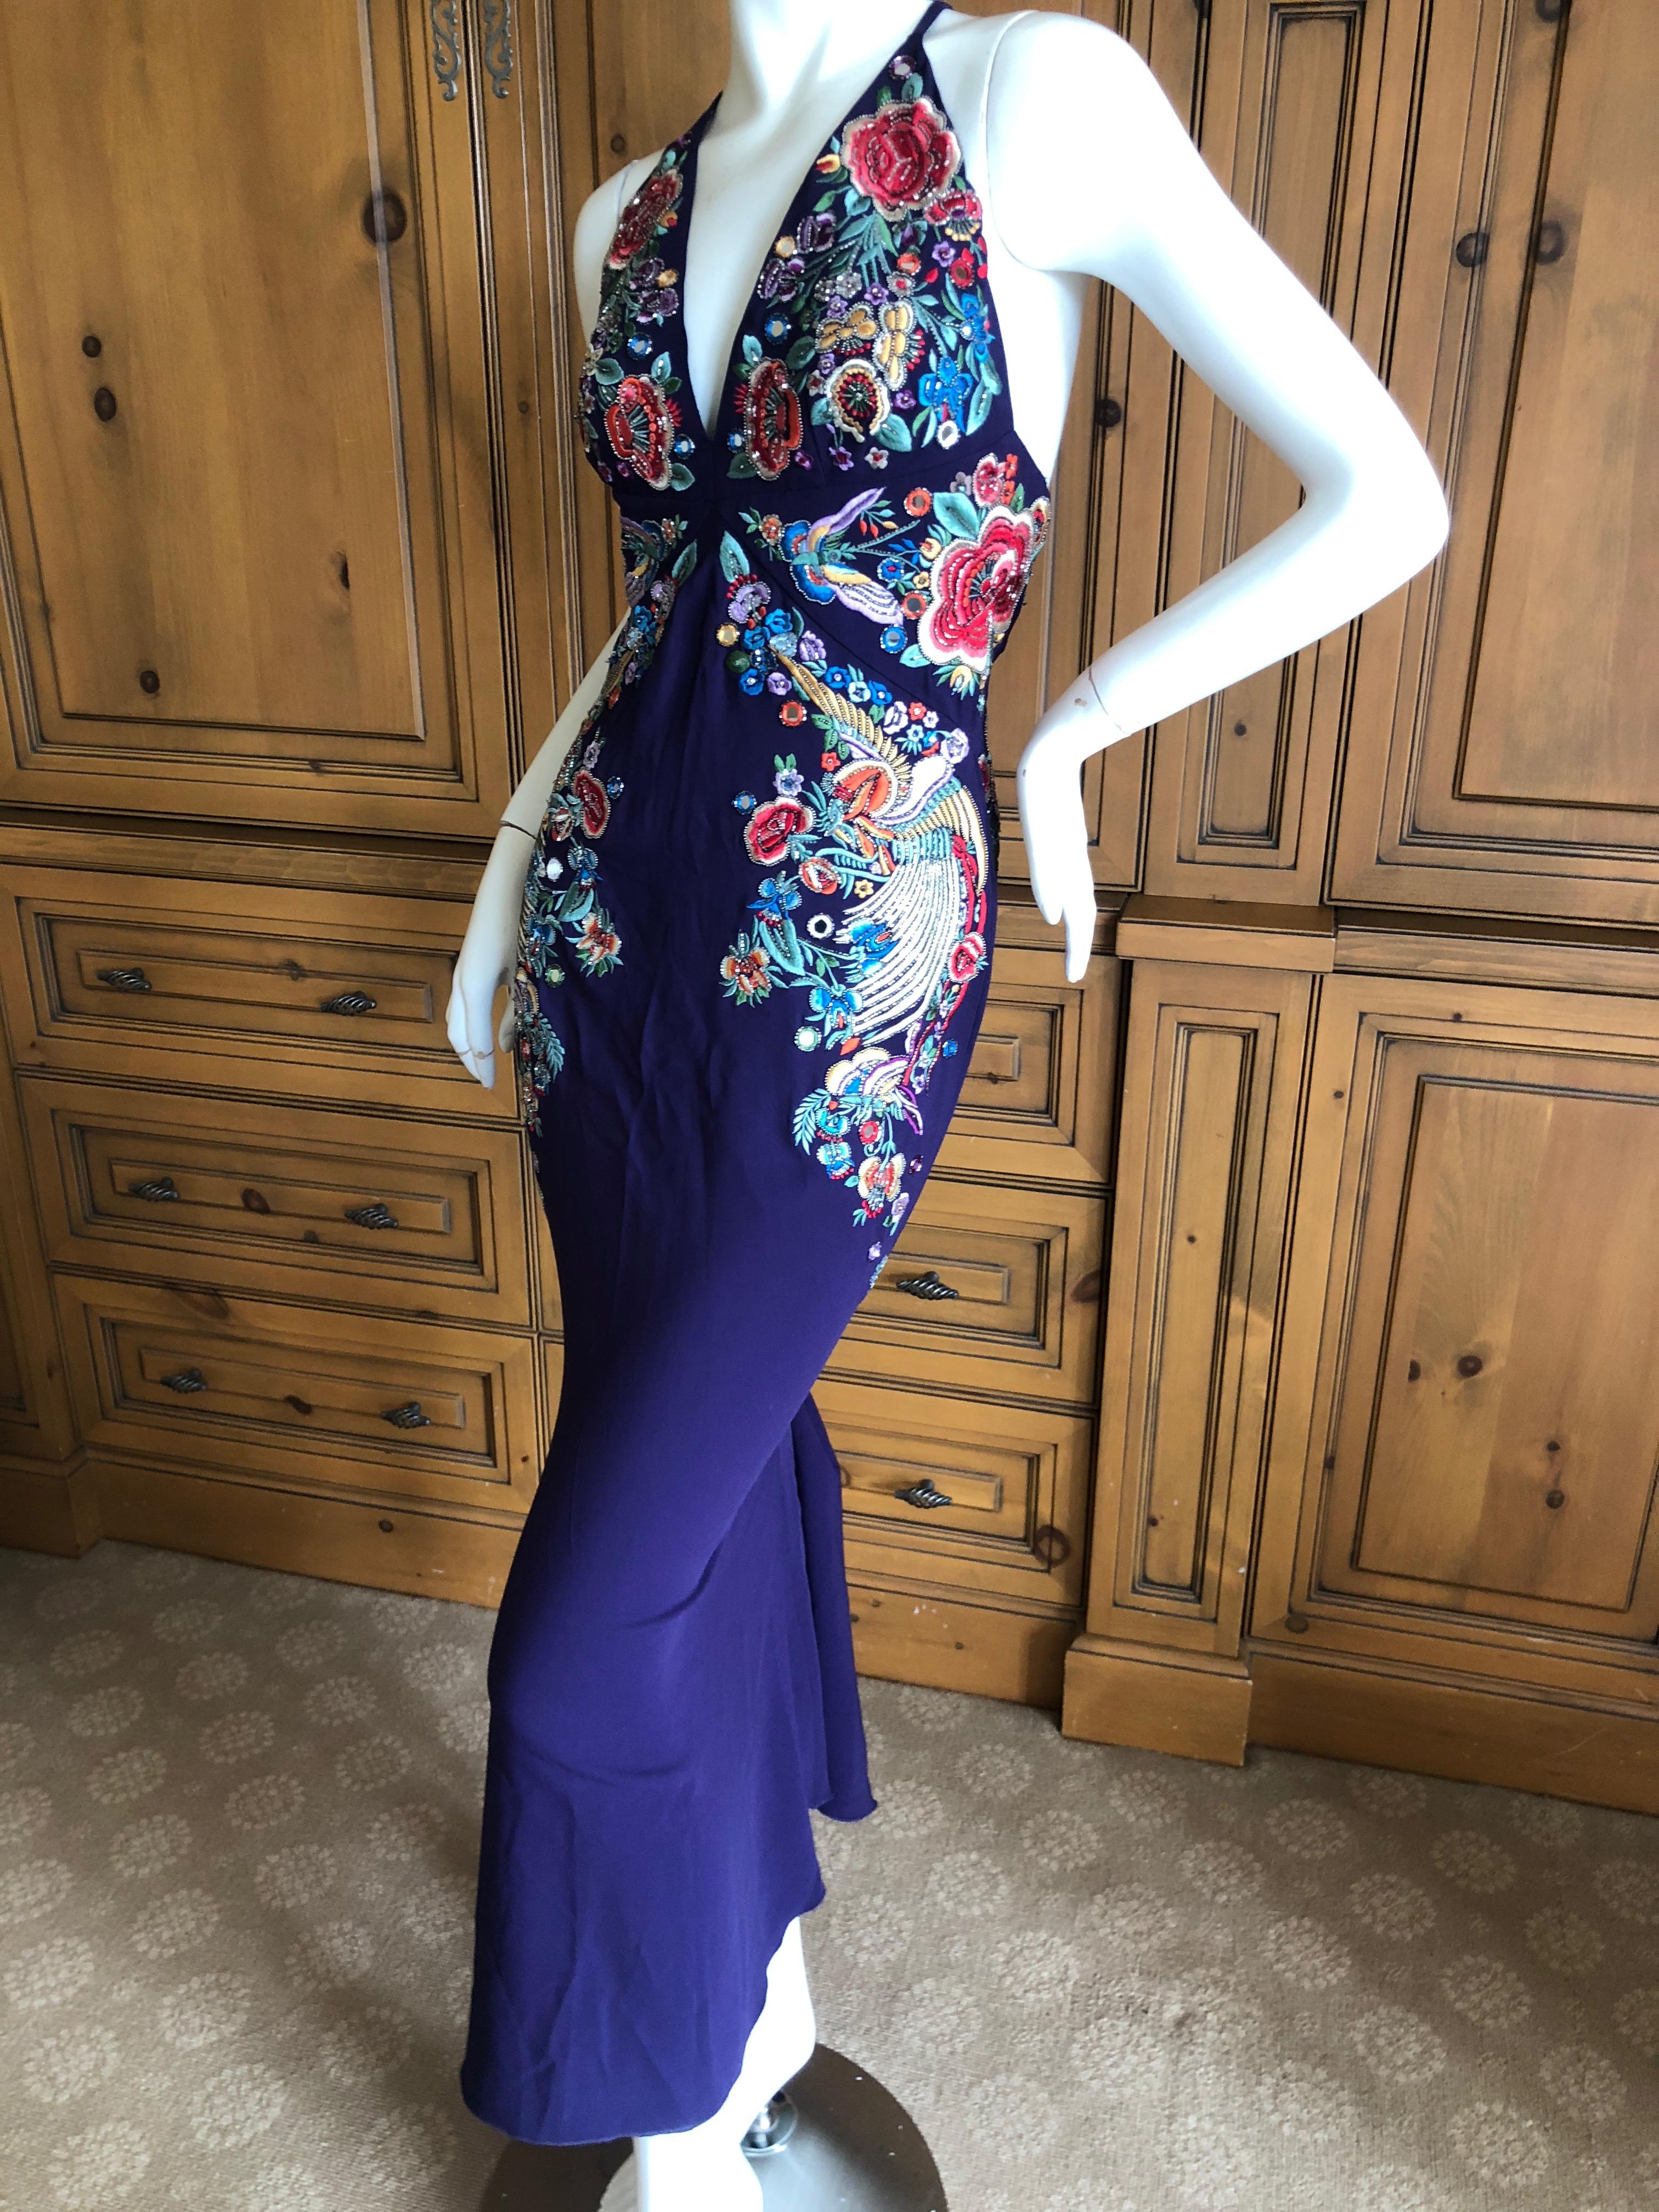 Roberto Cavalli Folkloric Embellished Dress with Matching Clutch 2017 Resort In Excellent Condition For Sale In Cloverdale, CA